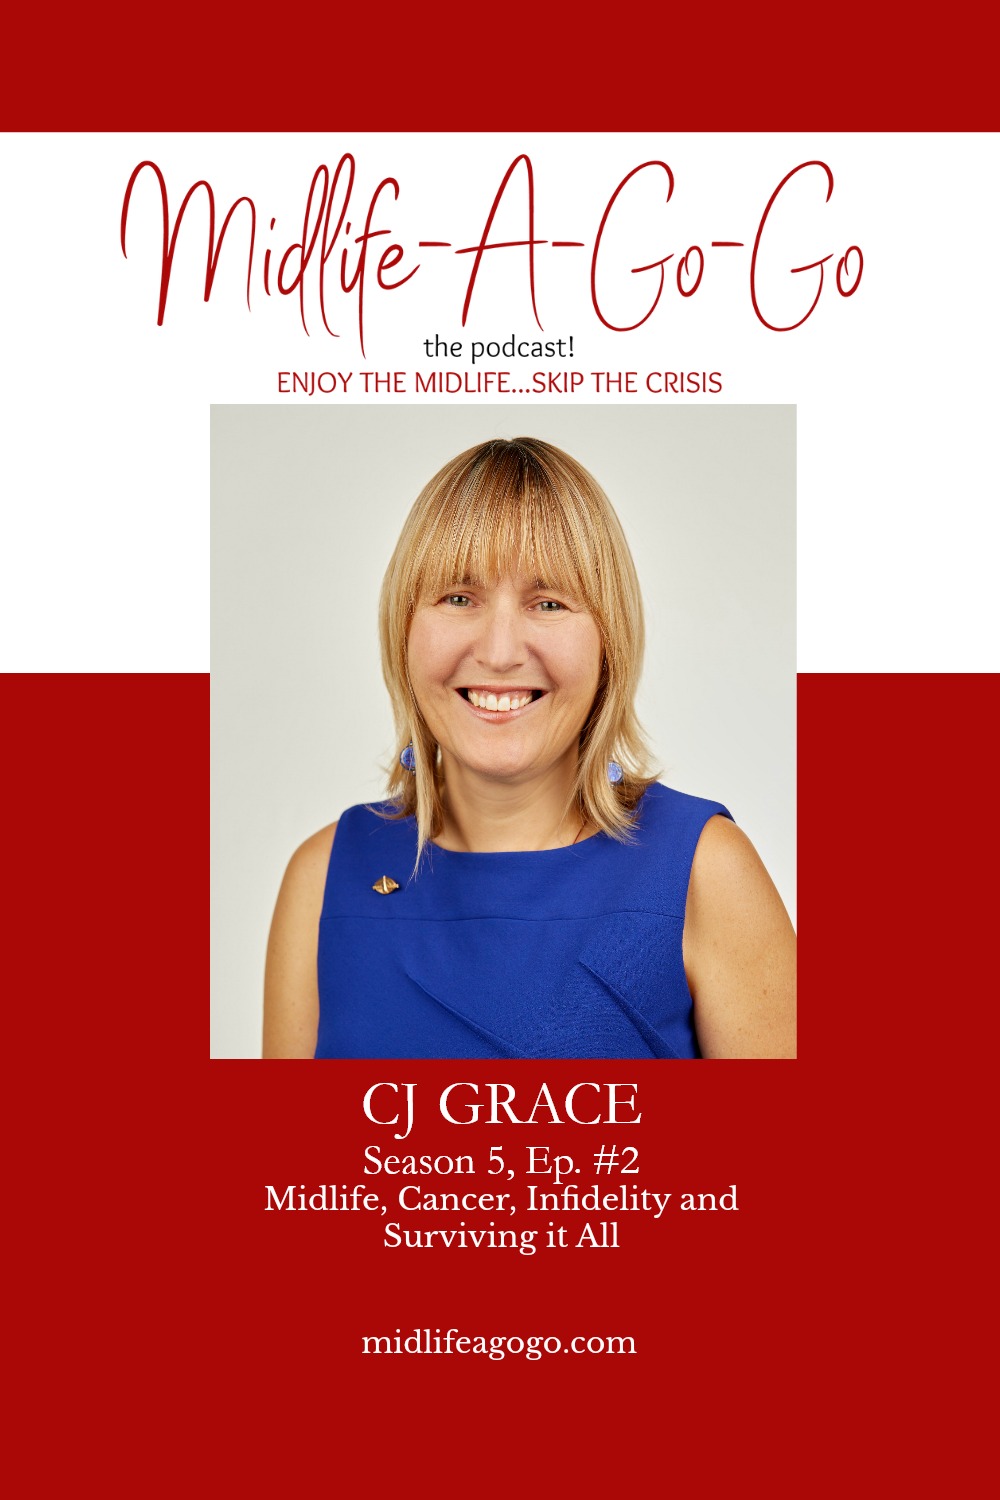 Midlife, Cancer, Infidelity and Surviving it All with CJ Grace